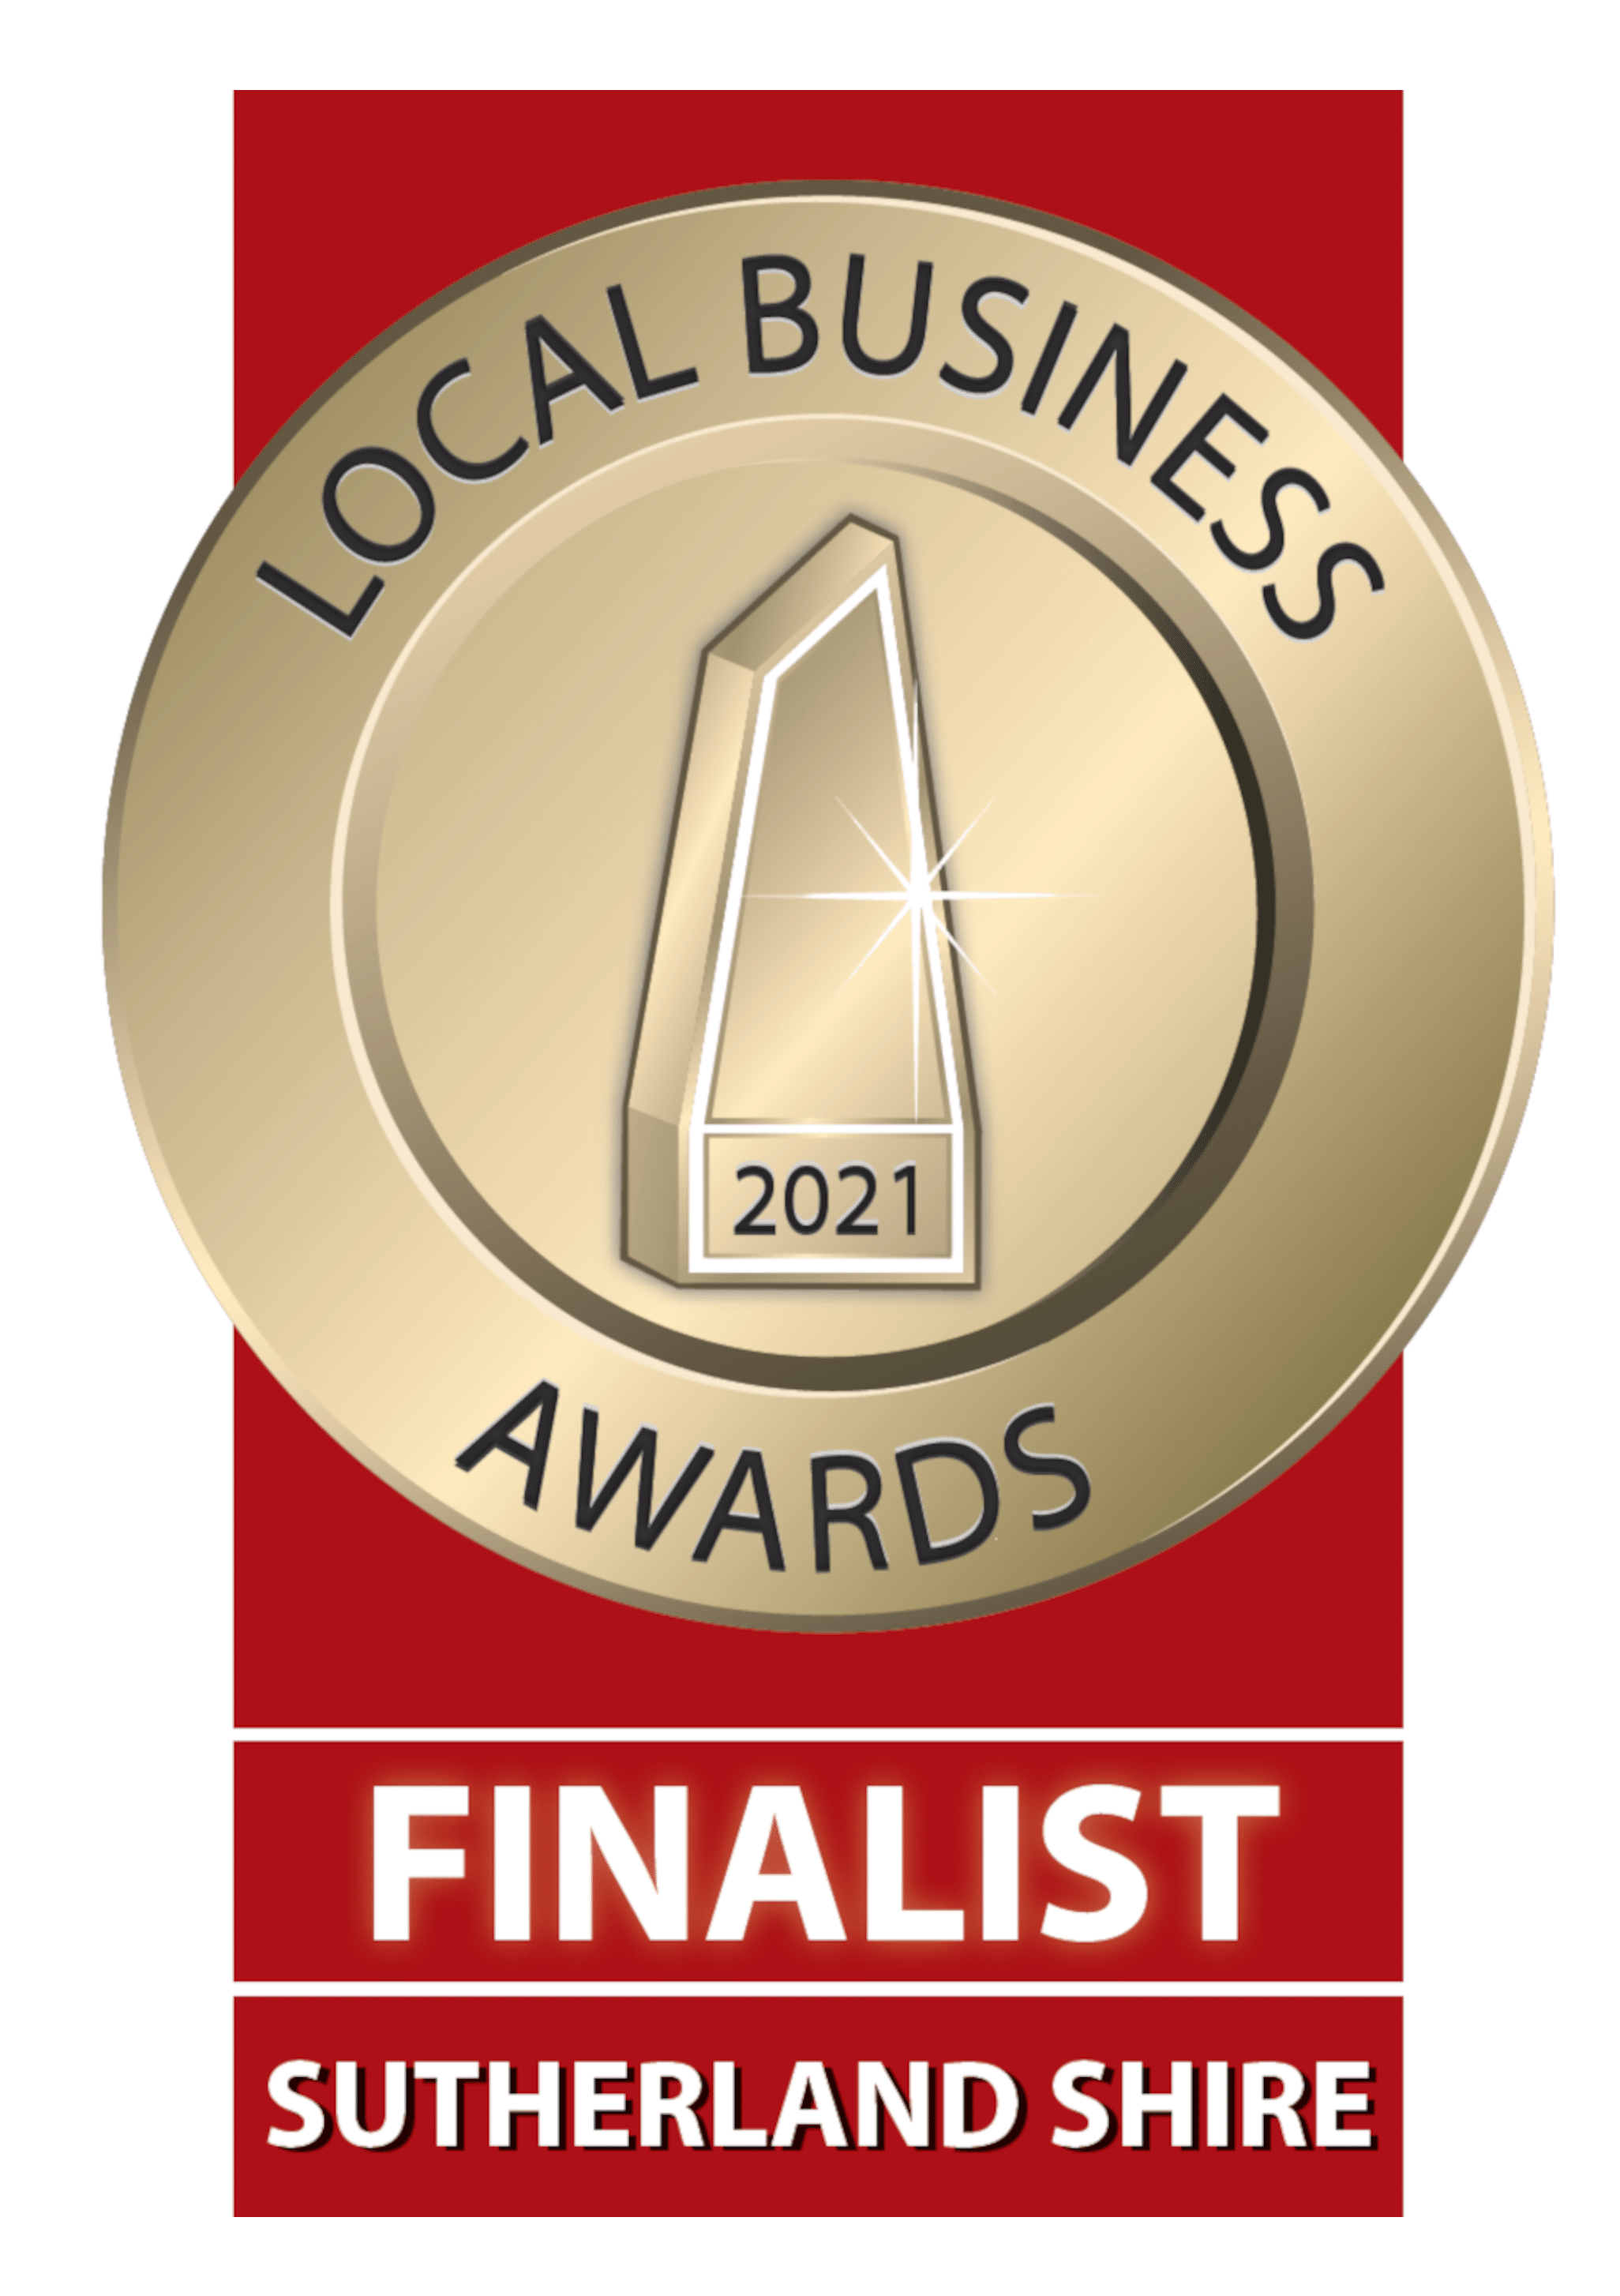 Sutherland Shire Local Business Awards Finalists Official Logo